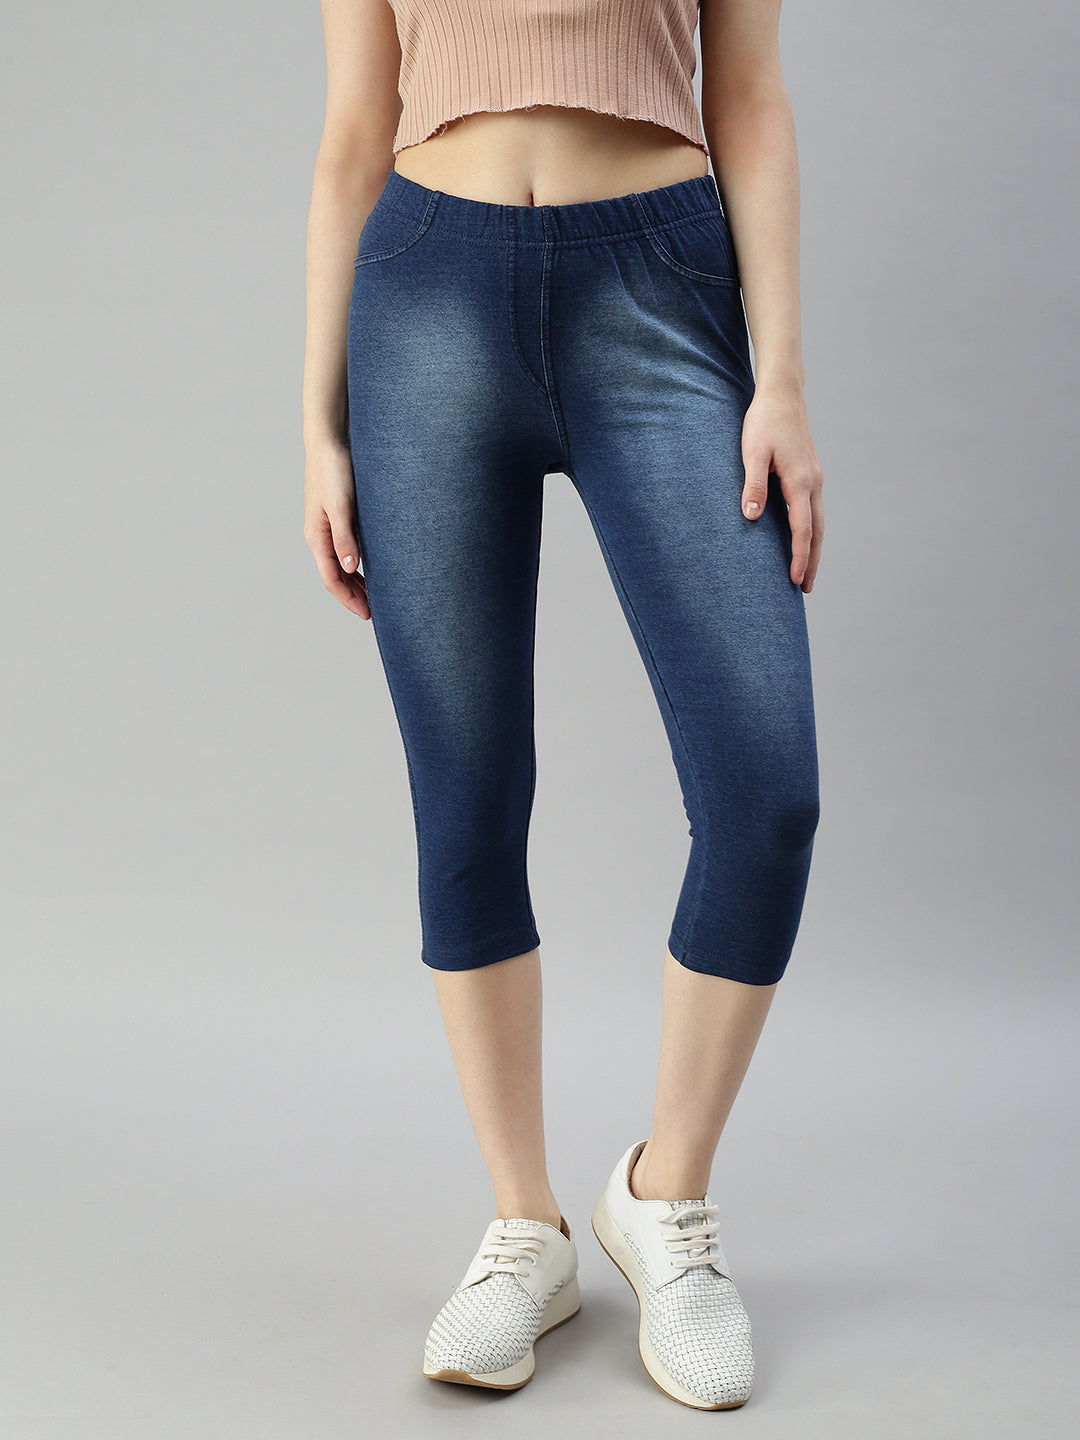 Find Cheap, Fashionable and Slimming summer shaper jeggings